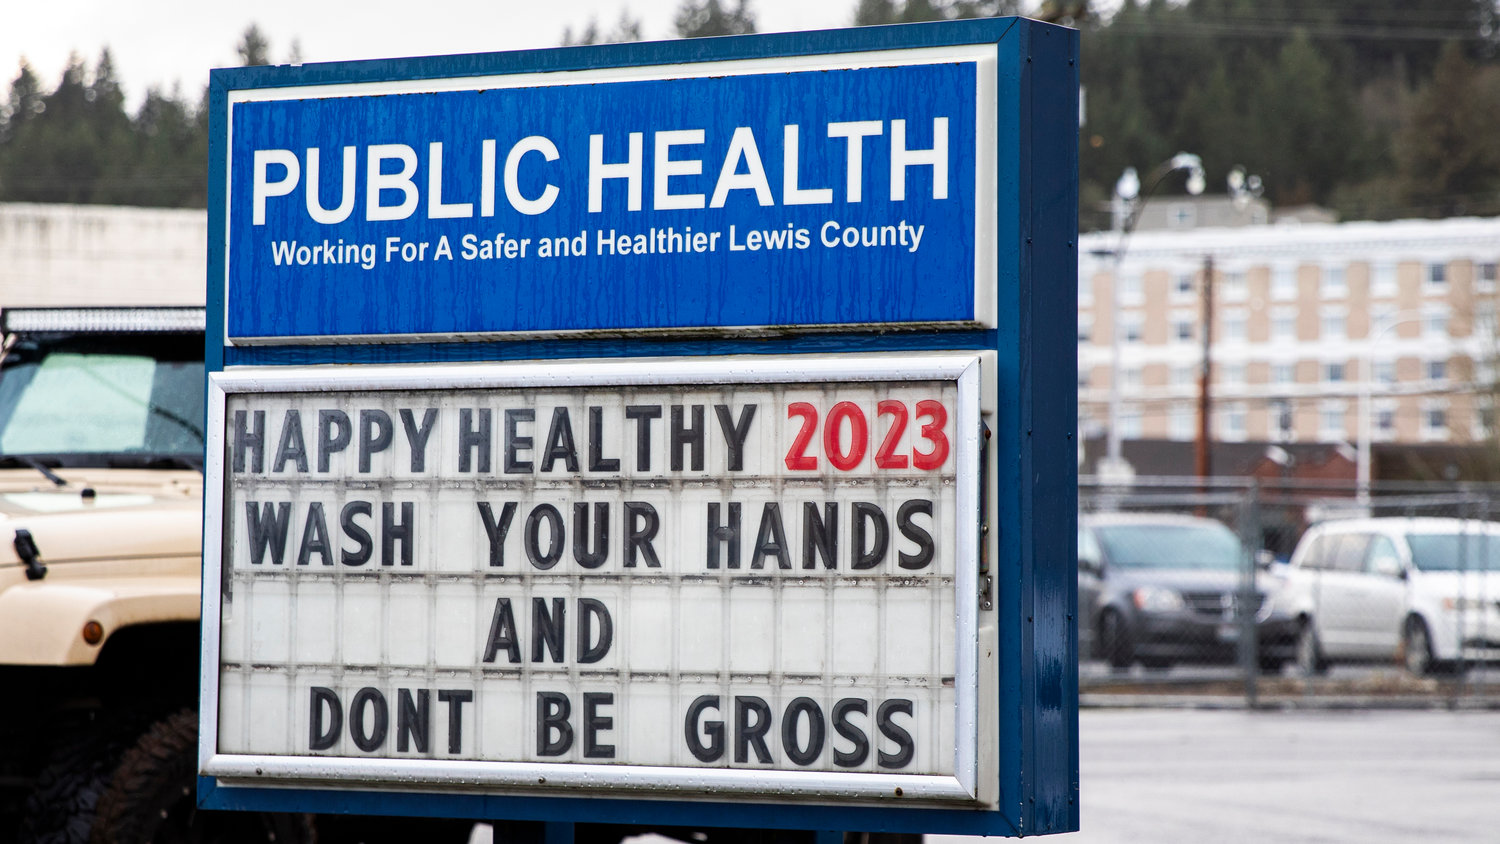 A sign sits on display outside the Lewis County Public Health building encouraging readers to “Wash your hands and don’t be gross,” in Chehalis on Monday.